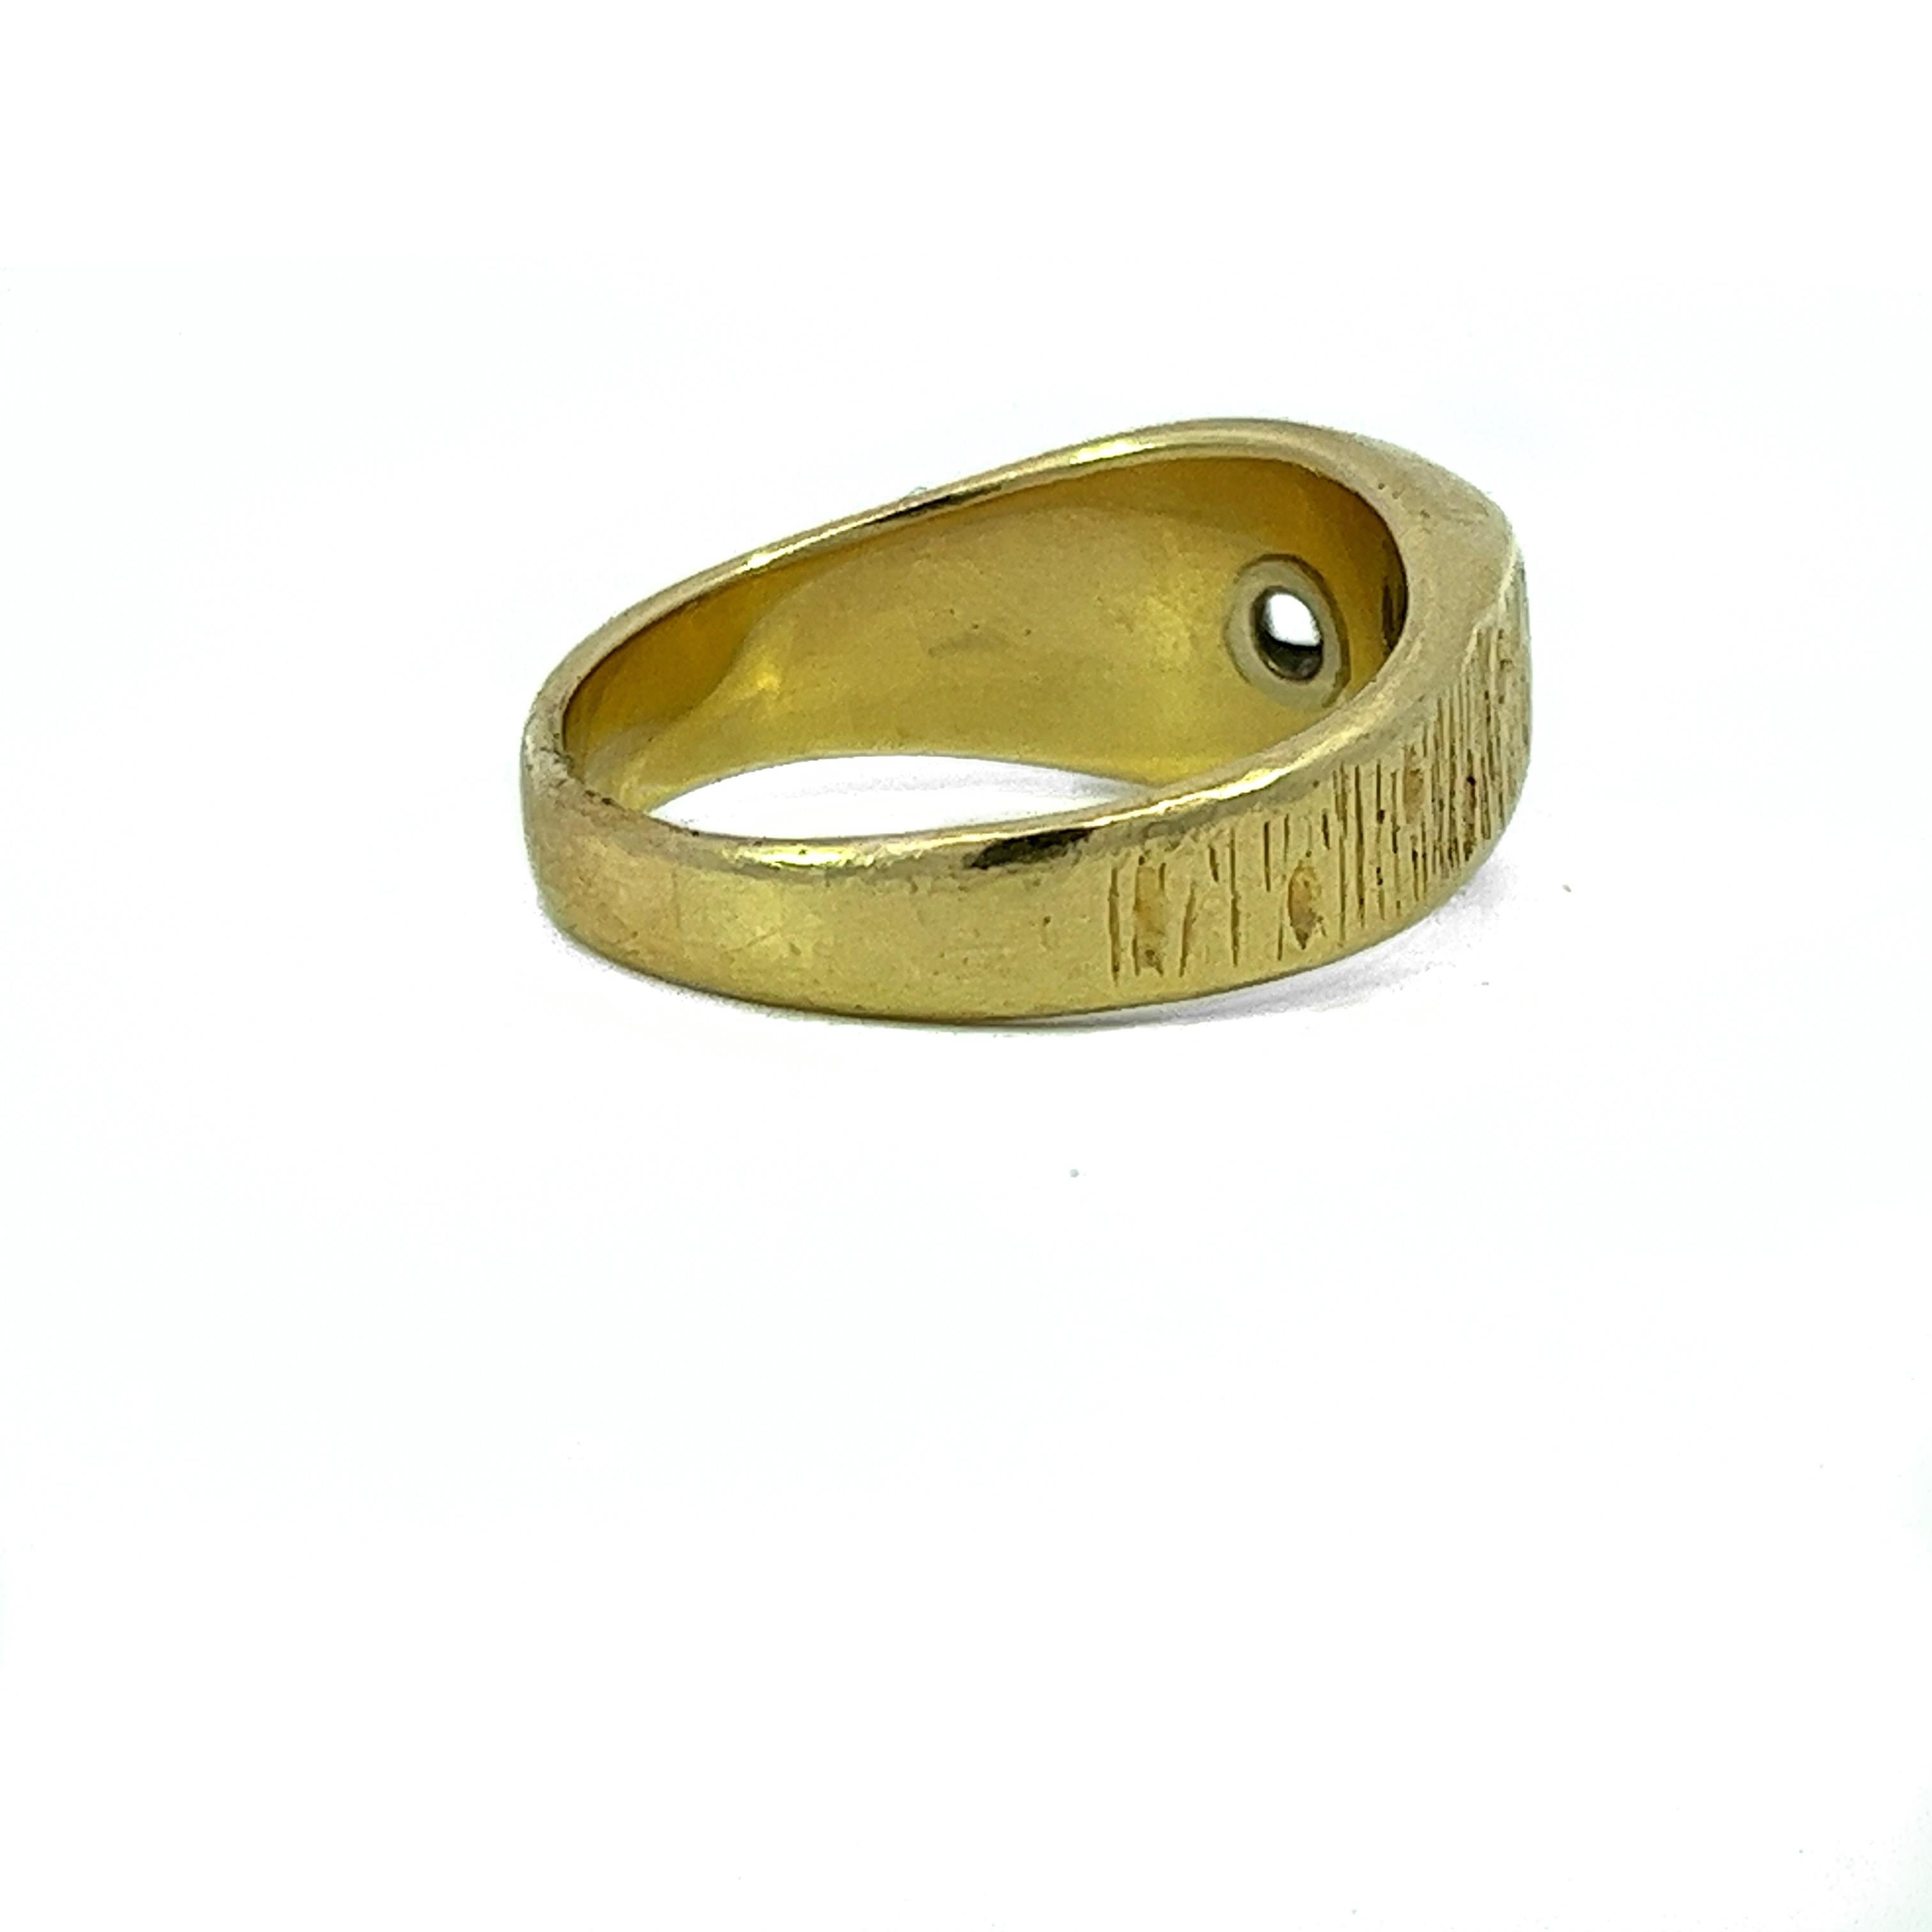 Vintage Artisan Men's Gold Diamond Ring: .45 Carat Diamond, Sizable 10.5 In Good Condition For Sale In Fairfield, CT